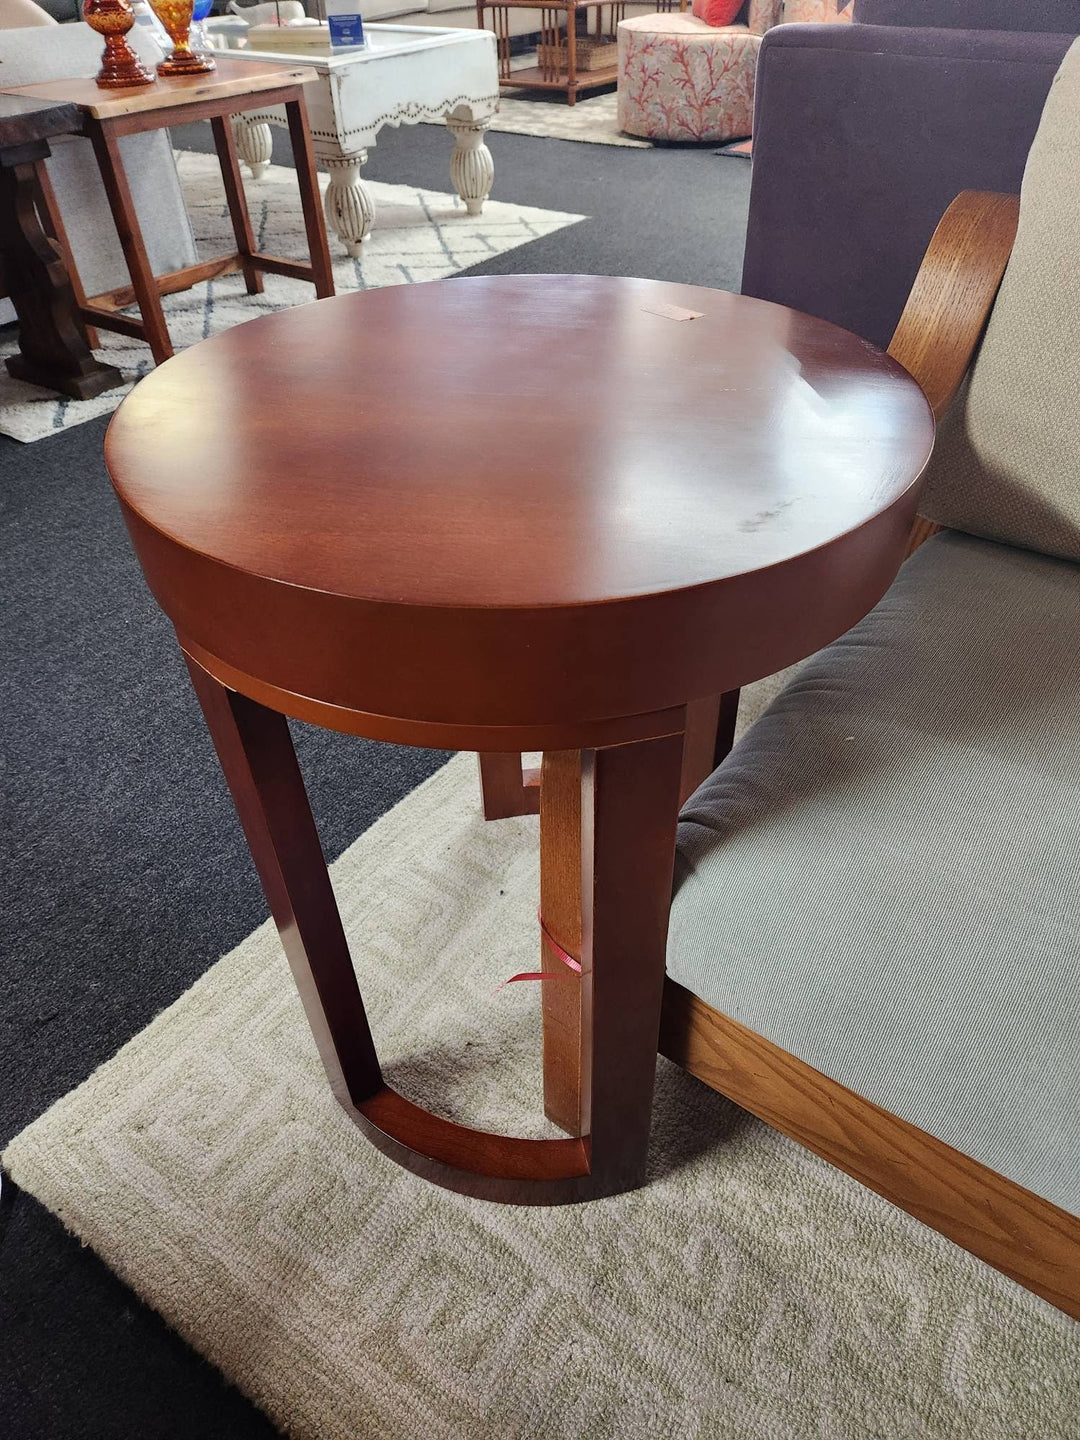 Set of 2 - Cherry Oval End Table